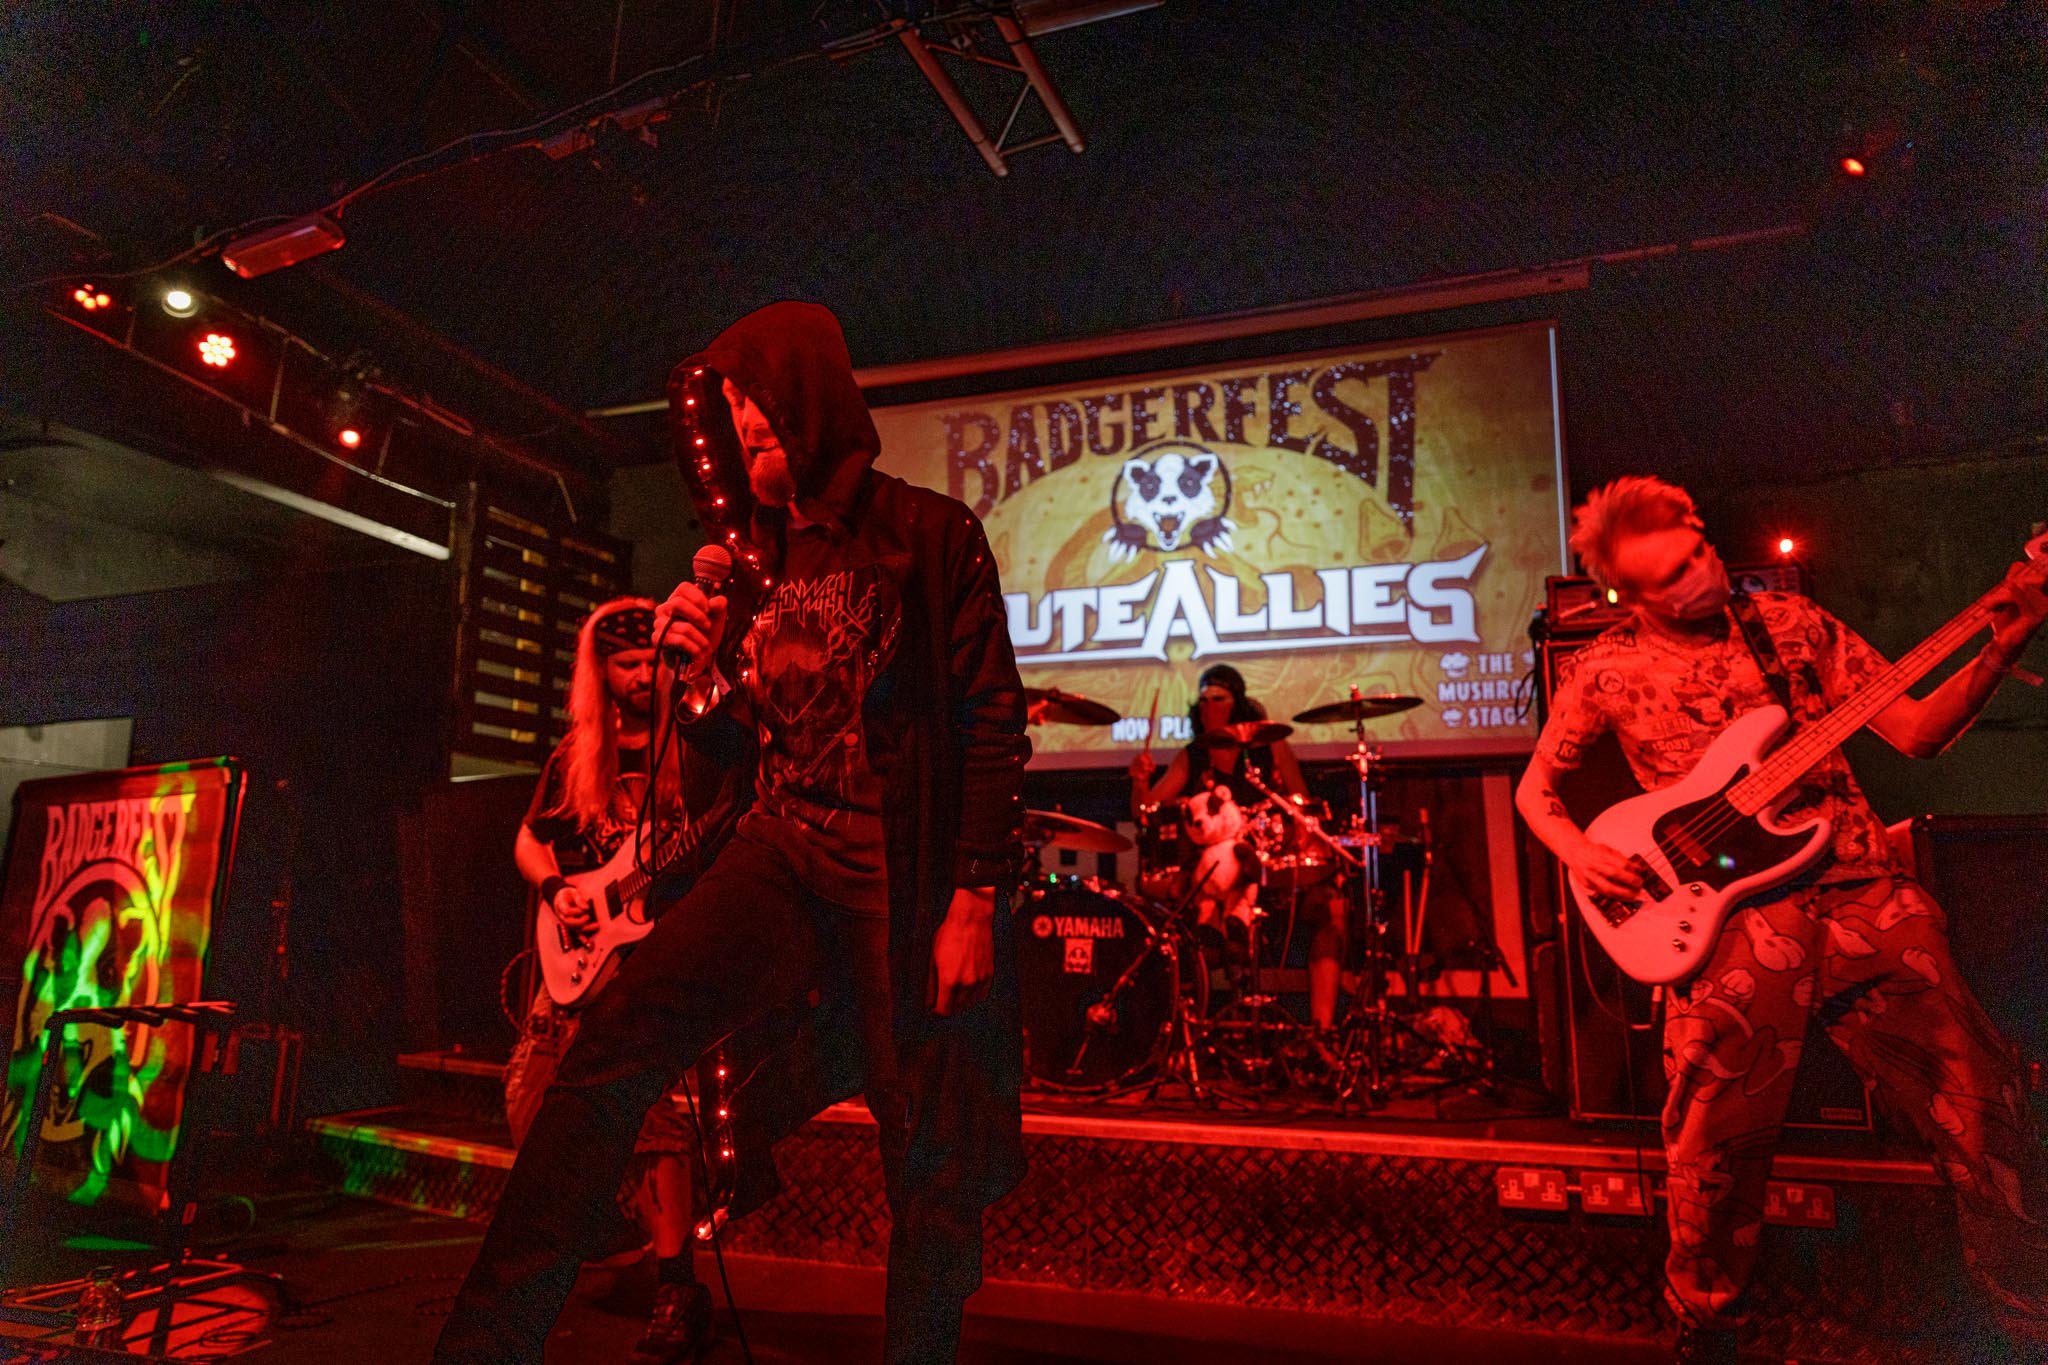 Bruteallies at the Badgerfest at the Bread Shed in Manchester on